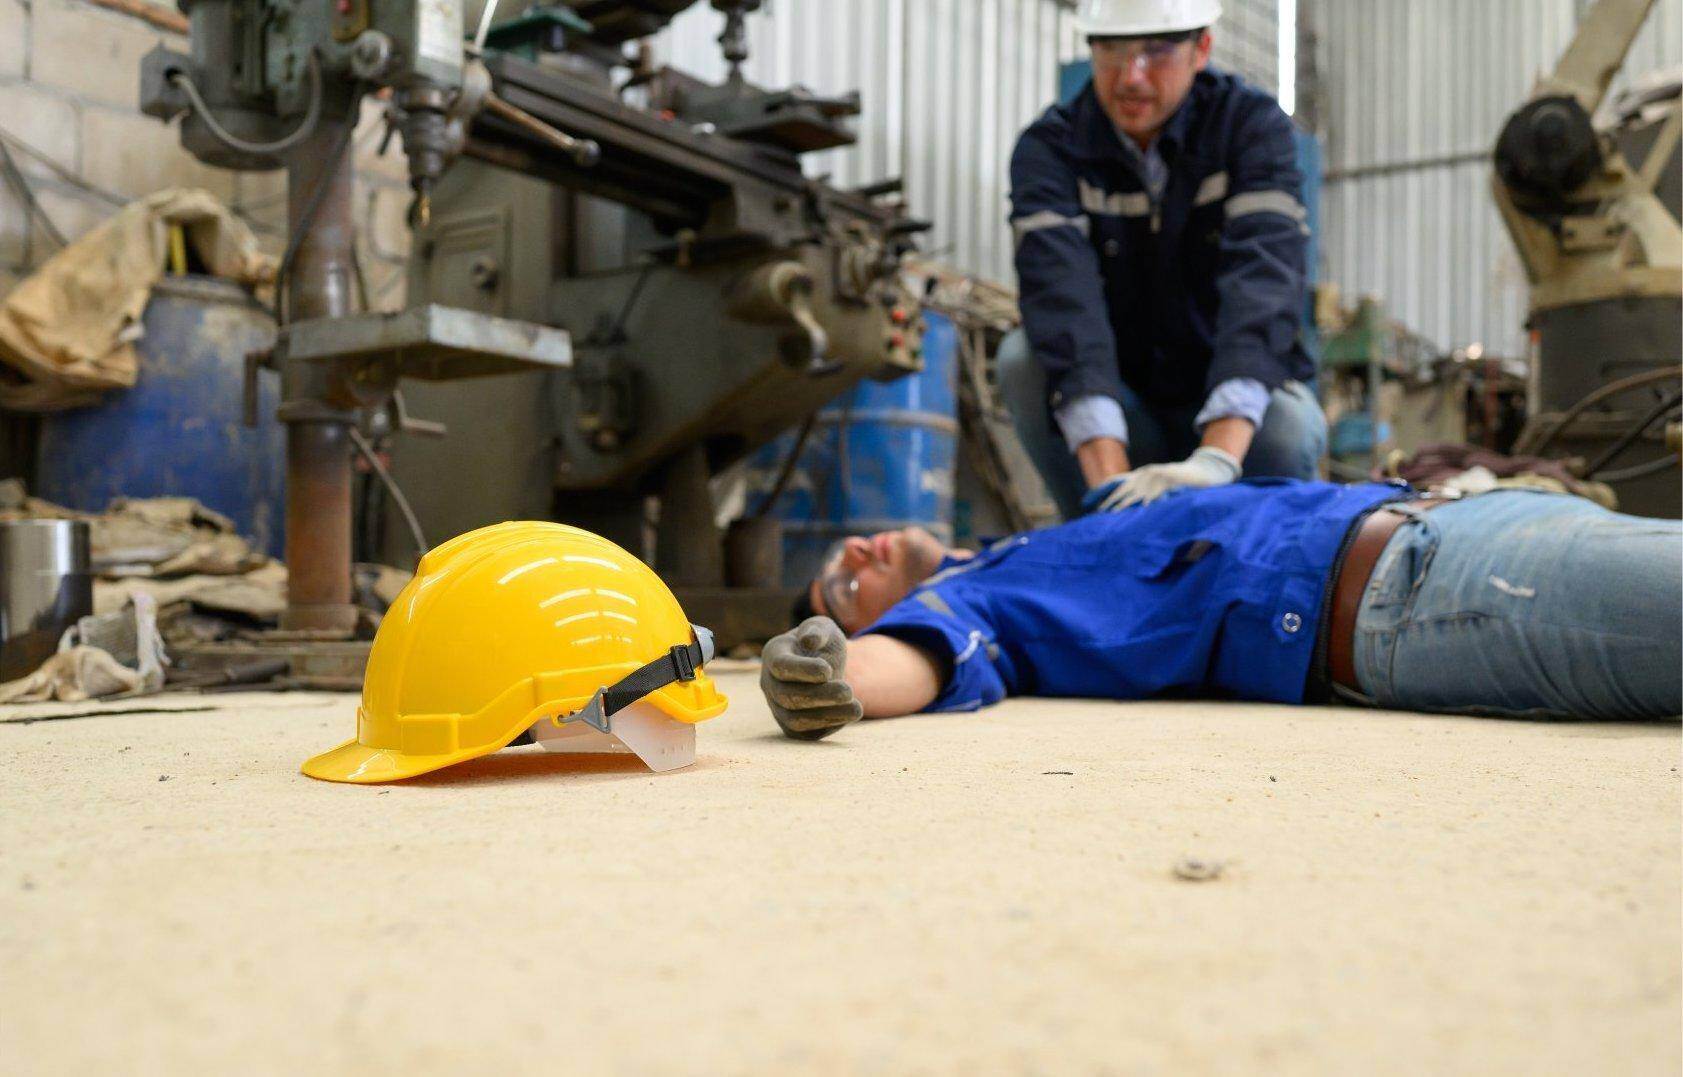 An unconscious man who has been injured on the job who will file for workers compensation in Braselton, Georgia